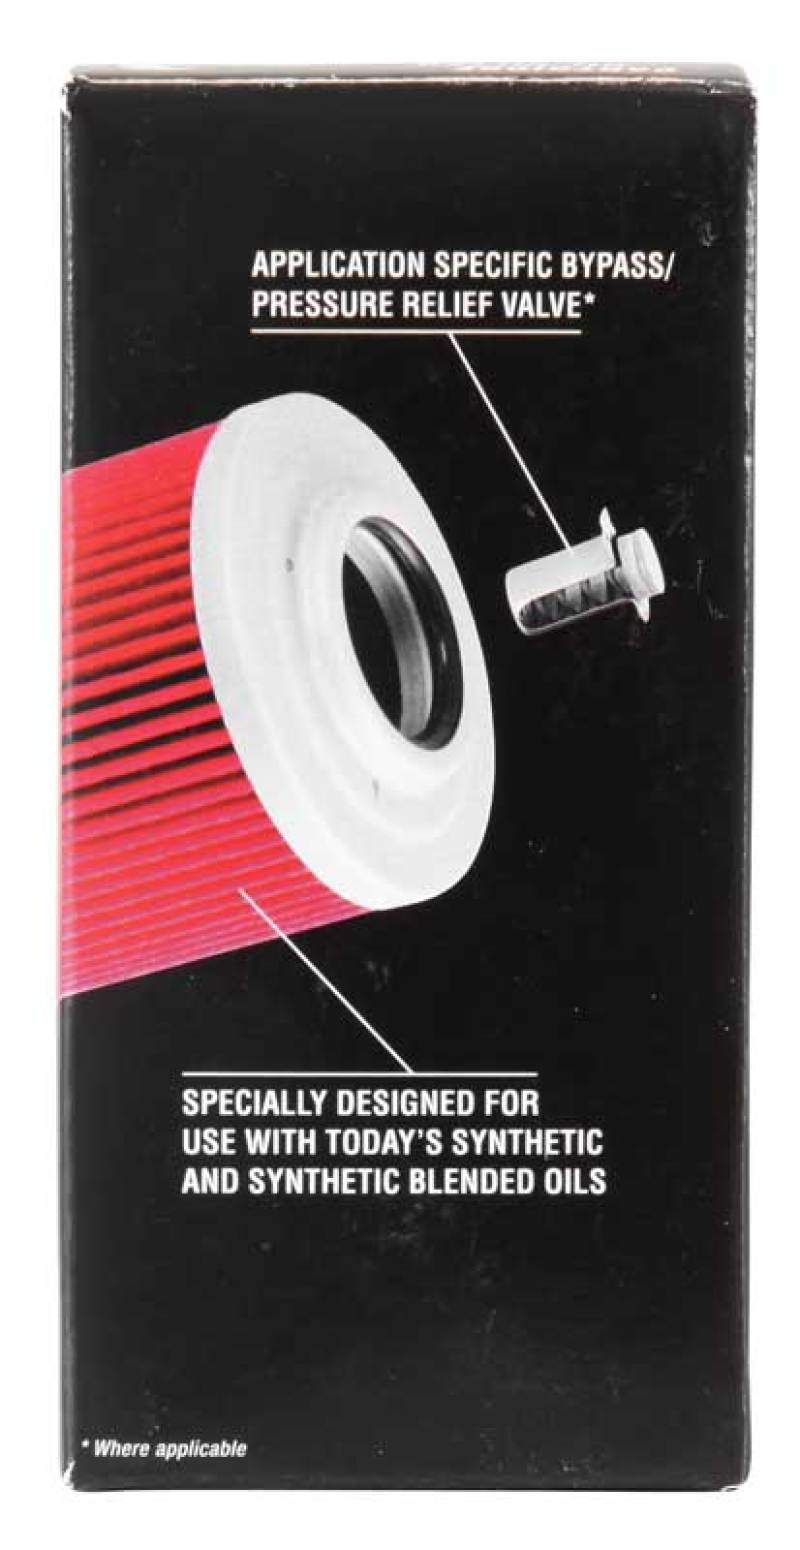 K&N Oil Filter Powersports Cartridge Oil Filter -  Shop now at Performance Car Parts